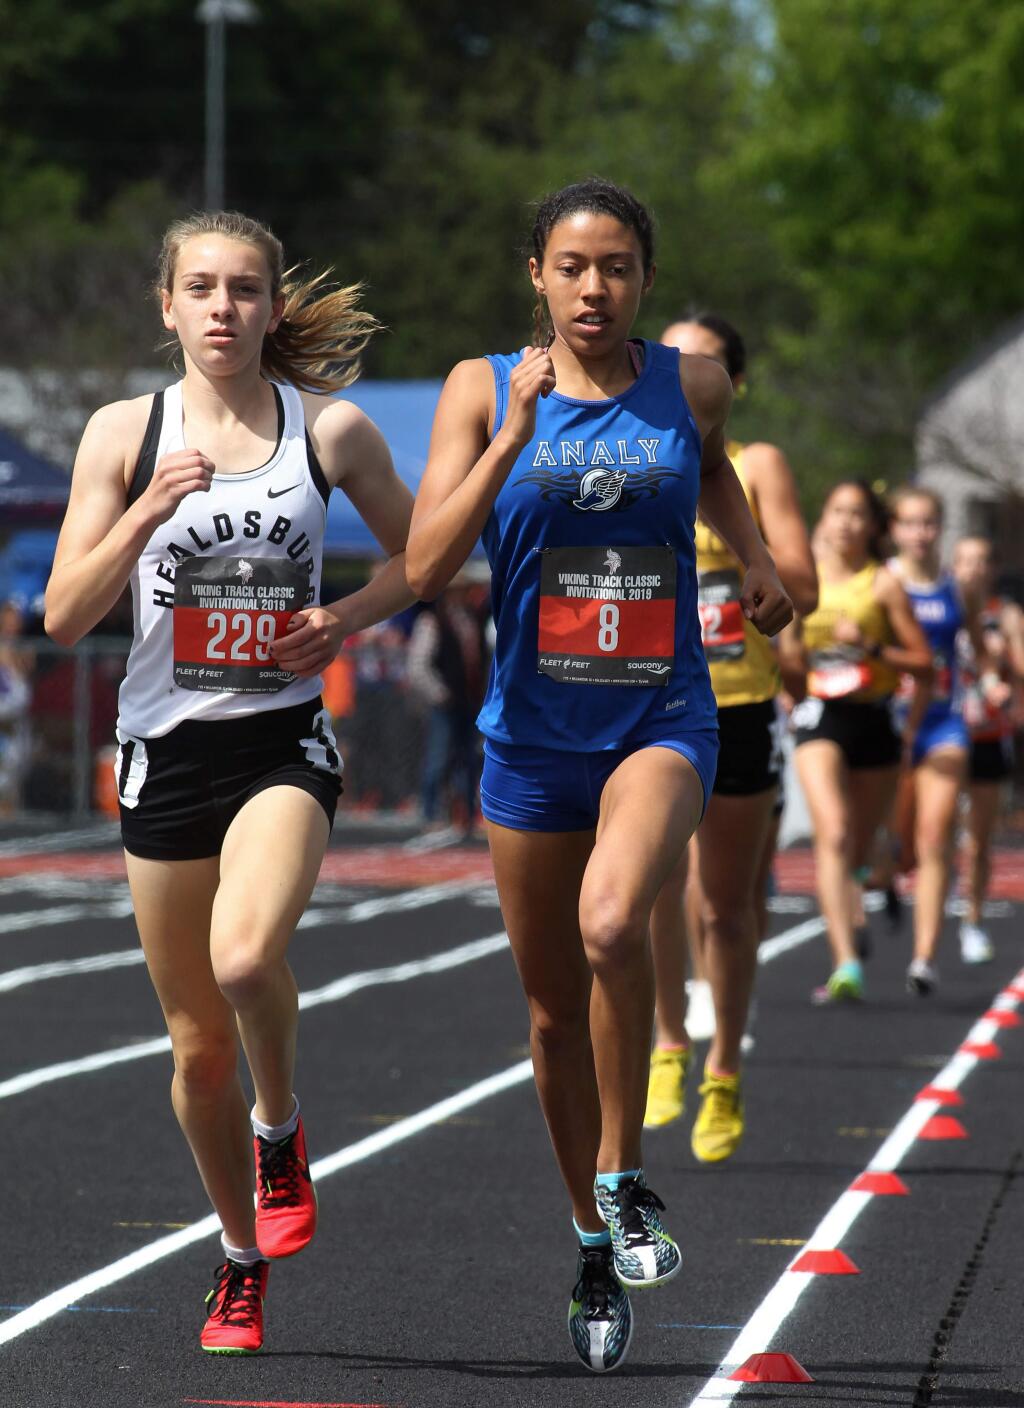 Gabrielle Peterson of Healdsburg High School, left, takes the lead alongside Sierra Atkins of Analy High School, in the 1,600-meter race at the Viking Track Classic at Montgomery High School in Santa Rosa on Saturday, April 20, 2019. (Darryl Bush / For The Press Democrat)